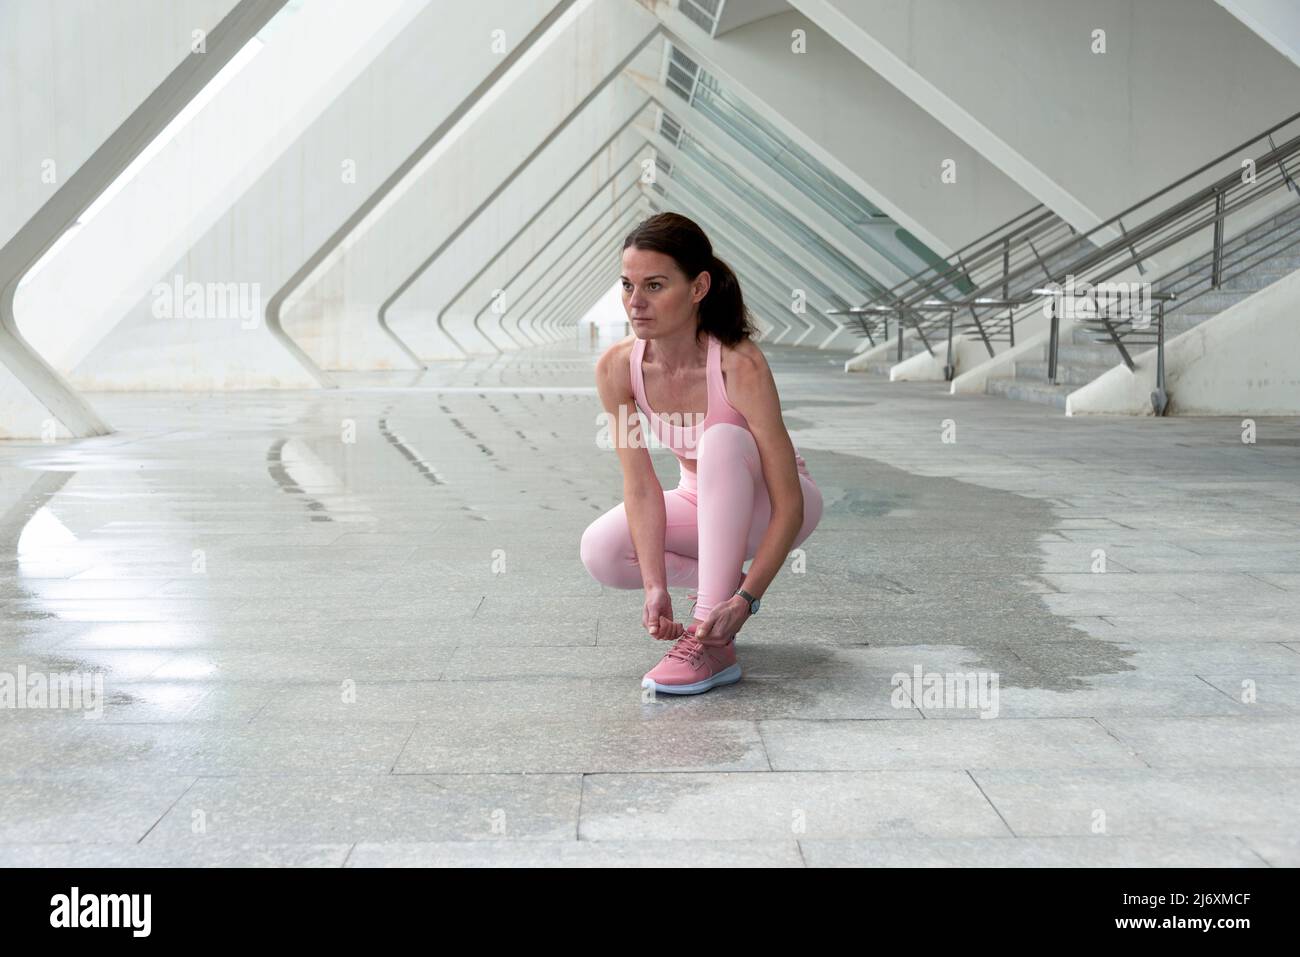 Woman runner tying here shoelaces before exercise, modern urban setting. Stock Photo